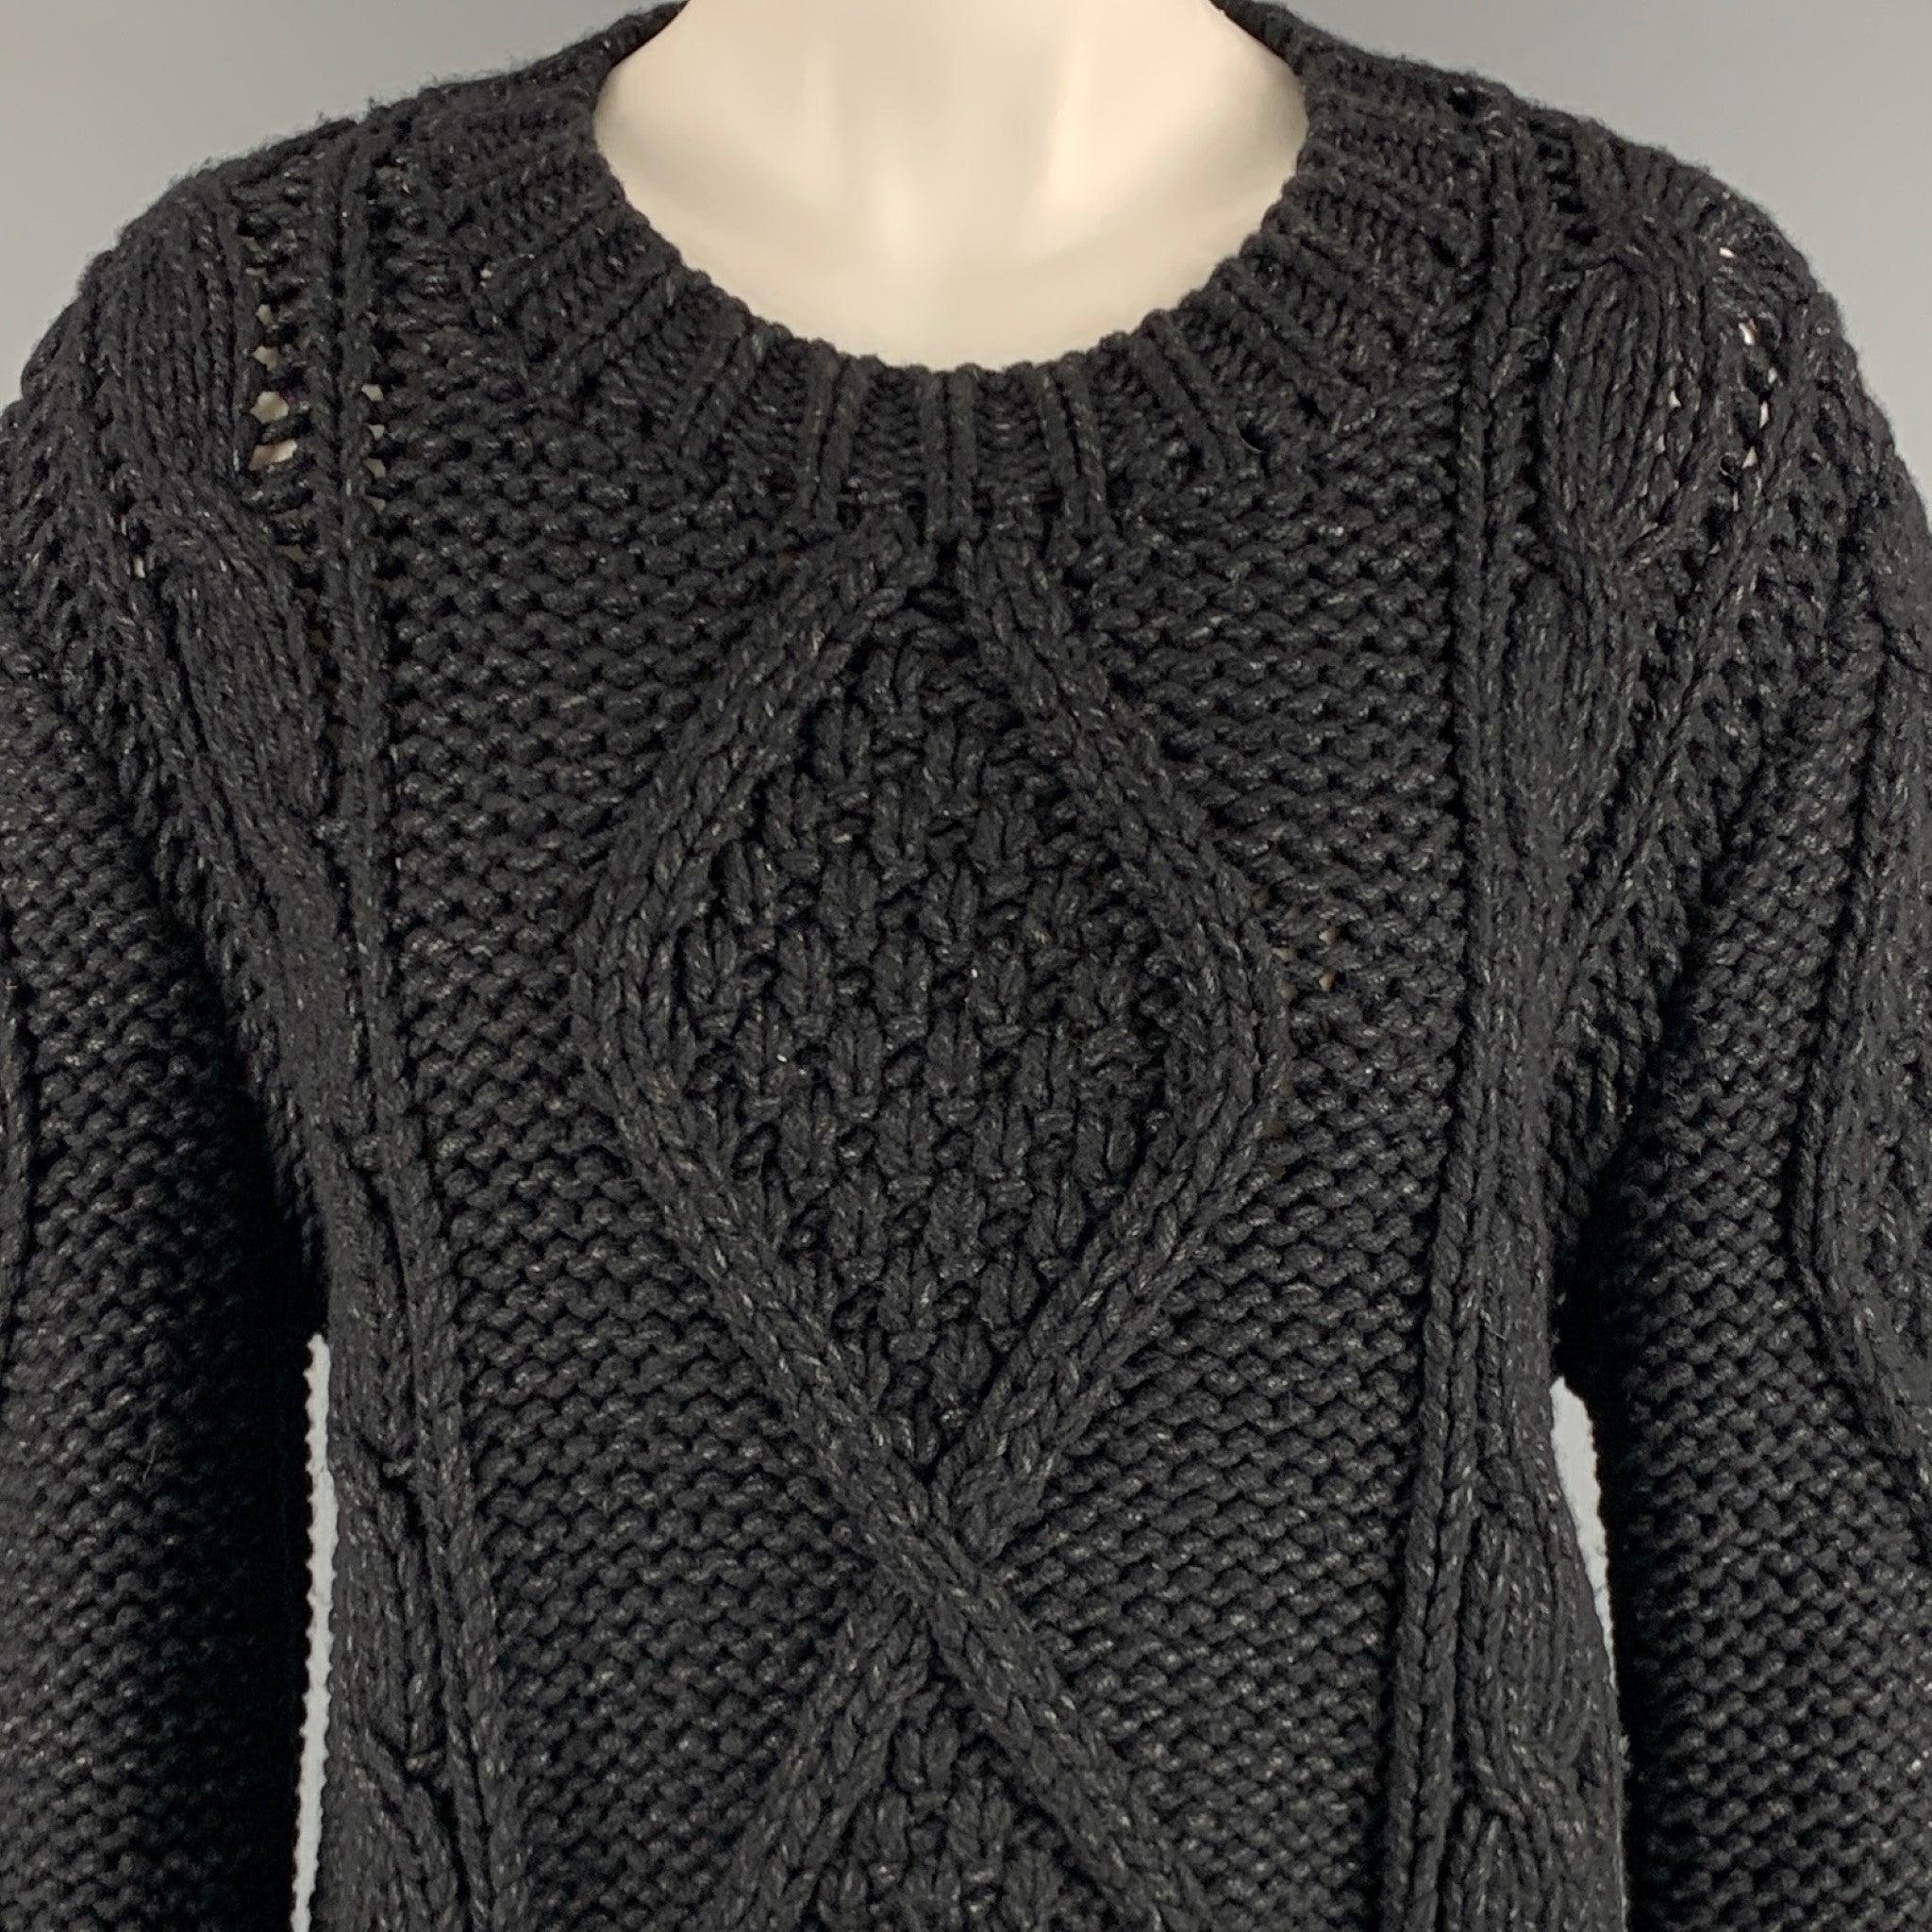 MAISON MARTIN MARGIELA sweater
in a
black and grey wool blend fabric featuring a fisherman style cable knit, long sleeves, and scoop neck. Made in Romania.Very Good Pre-Owned Condition. Minor pilling. 

Marked:   6 

Measurements: 
 
Shoulder: 17.5